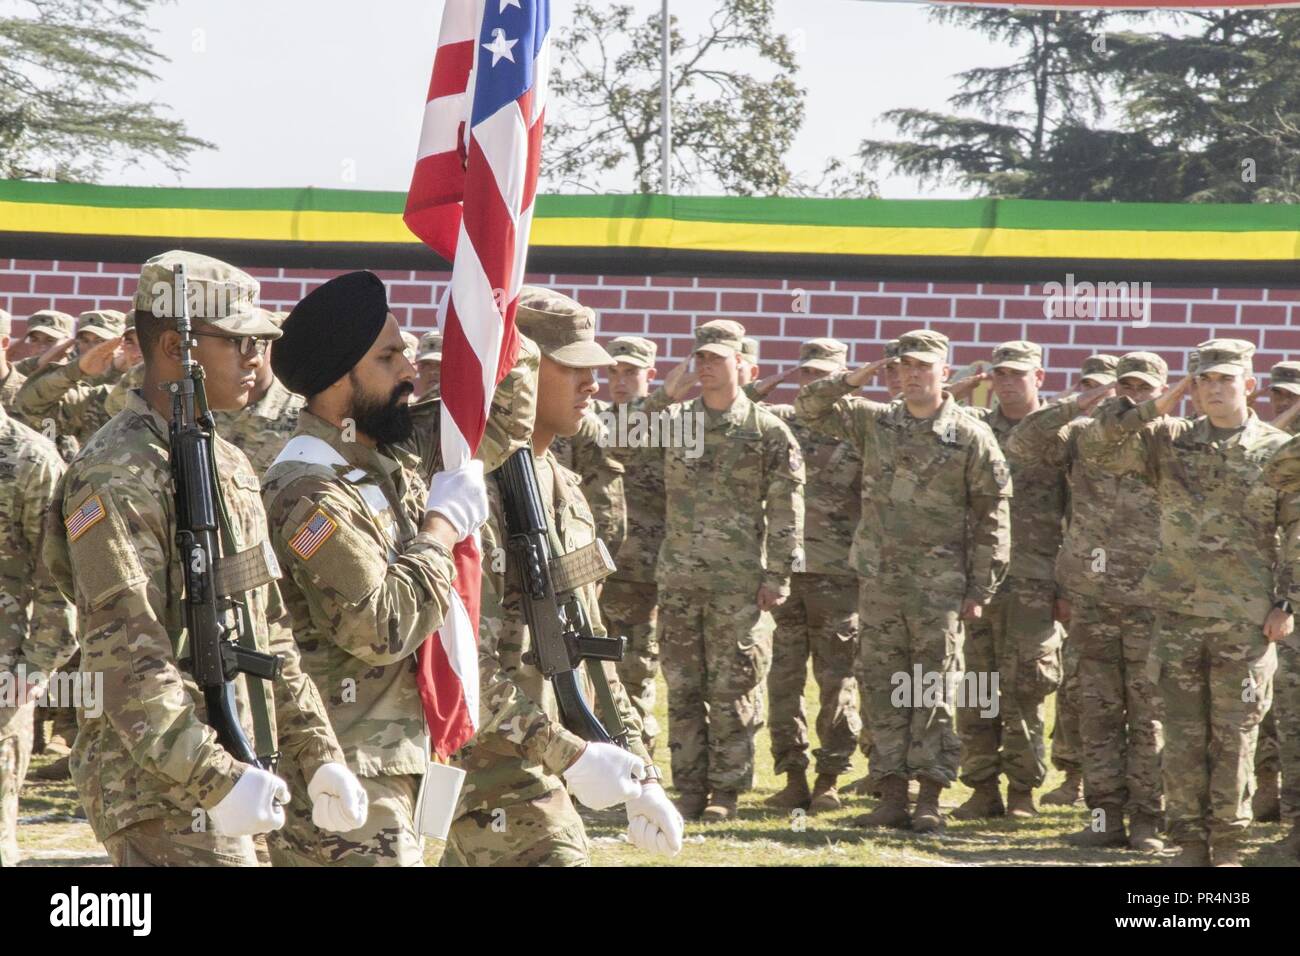 Sgt. Gurpreet Gill, a U.S. Soldier with 1-2 Stryker Brigade Combat Team, marches with the national colors onto a parade field, during the Yudh Abhyas 18 opening ceremony at the Chaubattia Military Station in Ranikhet, India, Sept. 16, 2018. Gill, who was originally from India, acted as a cultural advisor for U.S. Soldiers during Yudh Abhyas. The bilateral training exercise geared toward enhancing cooperation and coordination between the U.S. and Indian armies through professional development and cultural exchanges. Stock Photo